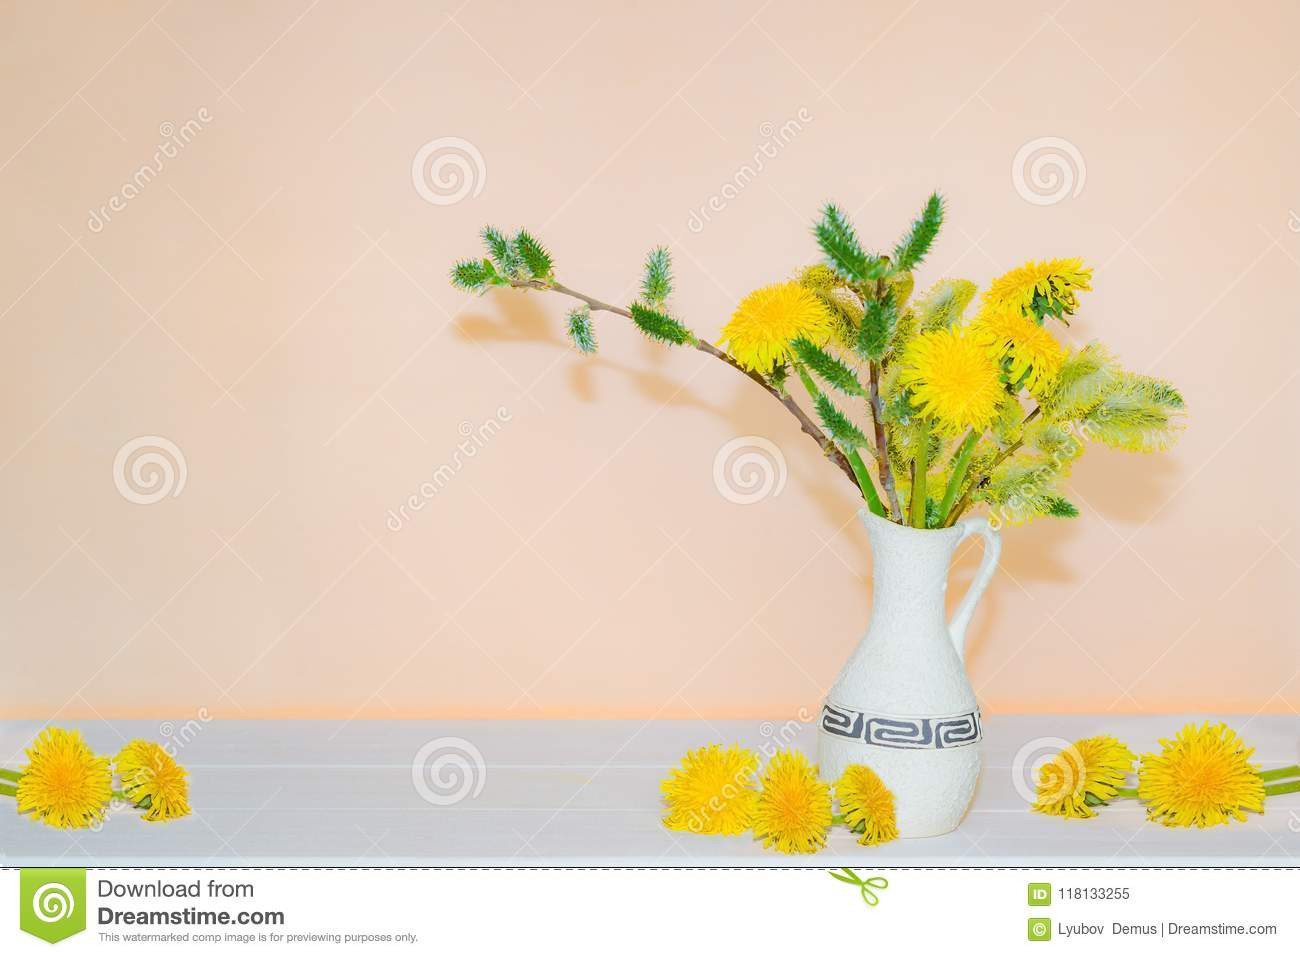 13 Unique Birch Tree Flower Vases 2024 free download birch tree flower vases of bouquet of spring willow branches with dandelion flowers in a vase with regard to bouquet of spring willow branches with dandelion flowers in a vase on a festive b